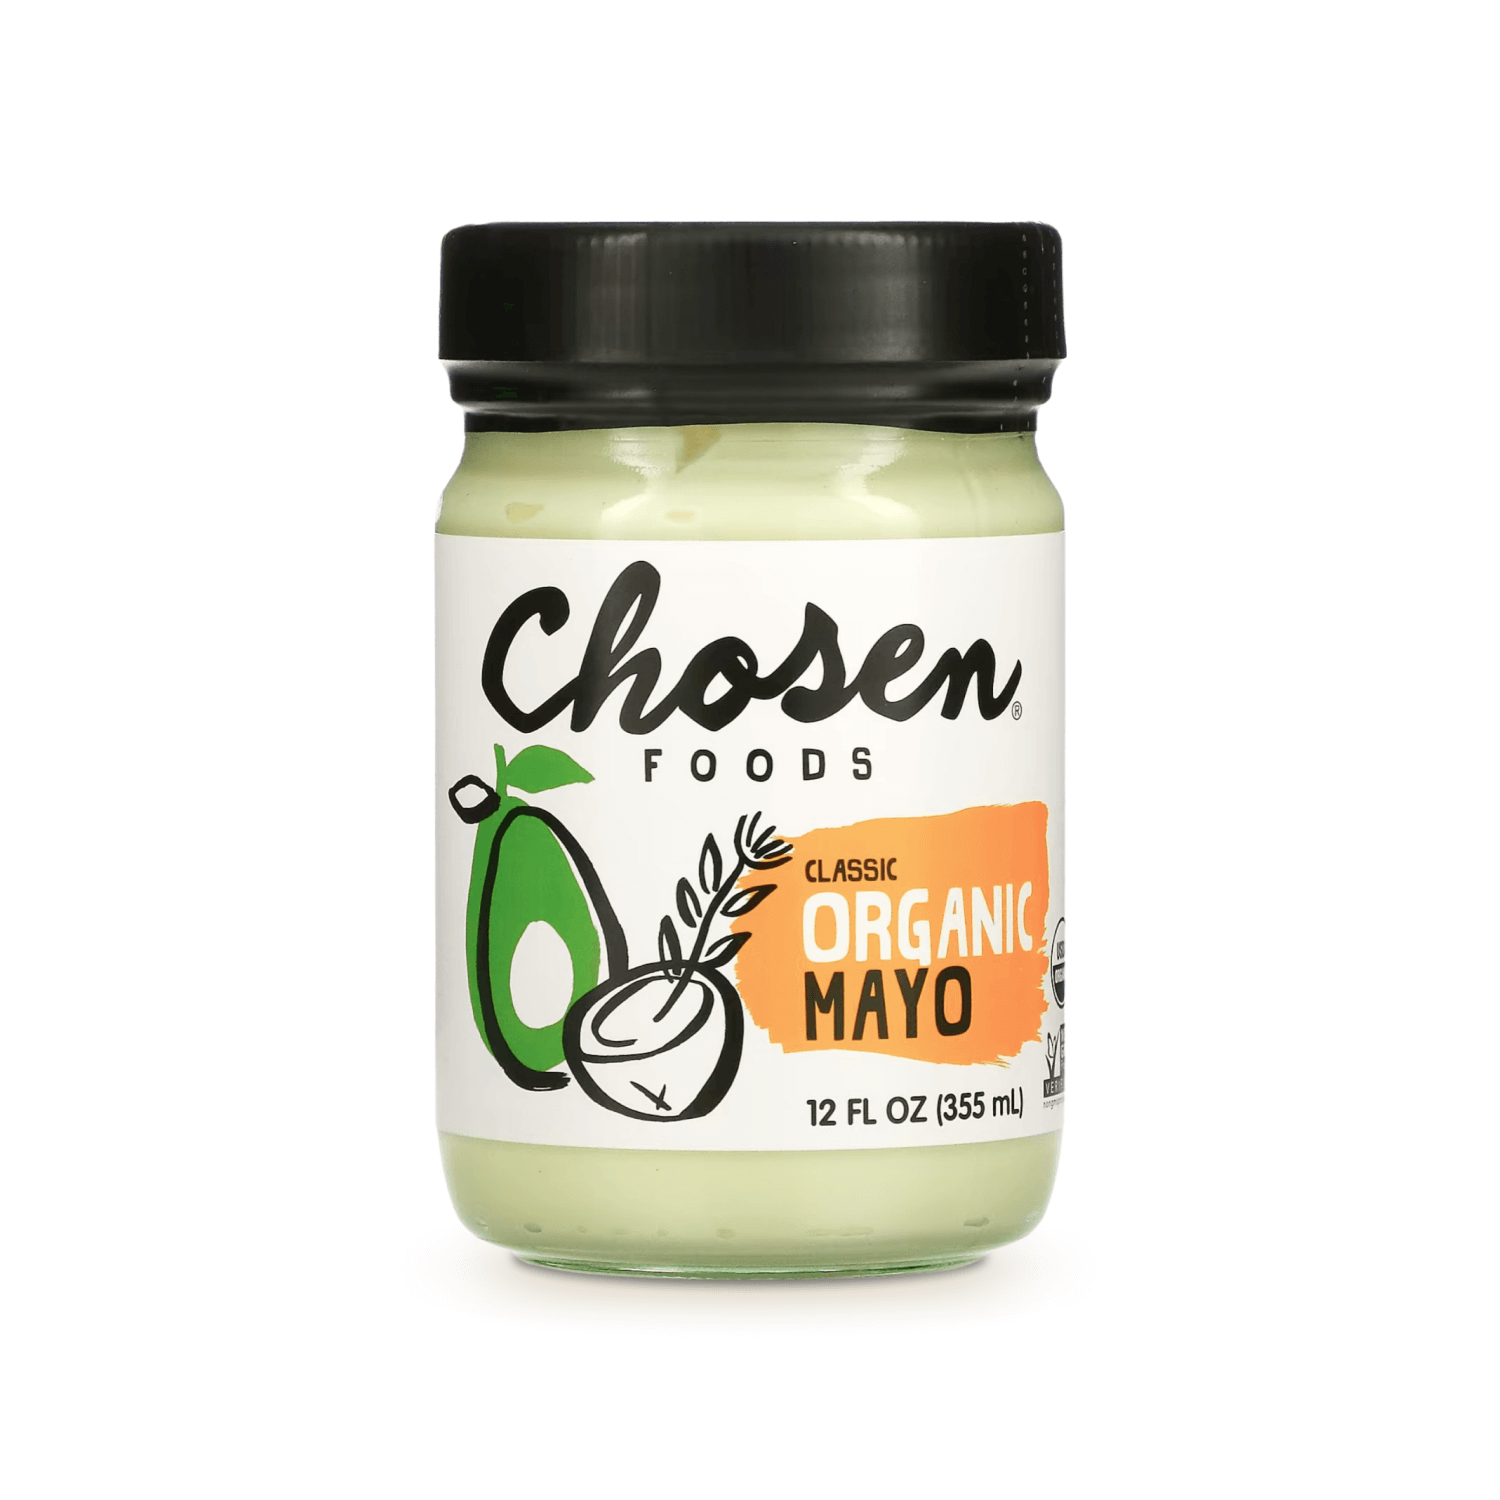 Mayo Made With Avocado Oil, 12 fl oz at Whole Foods Market